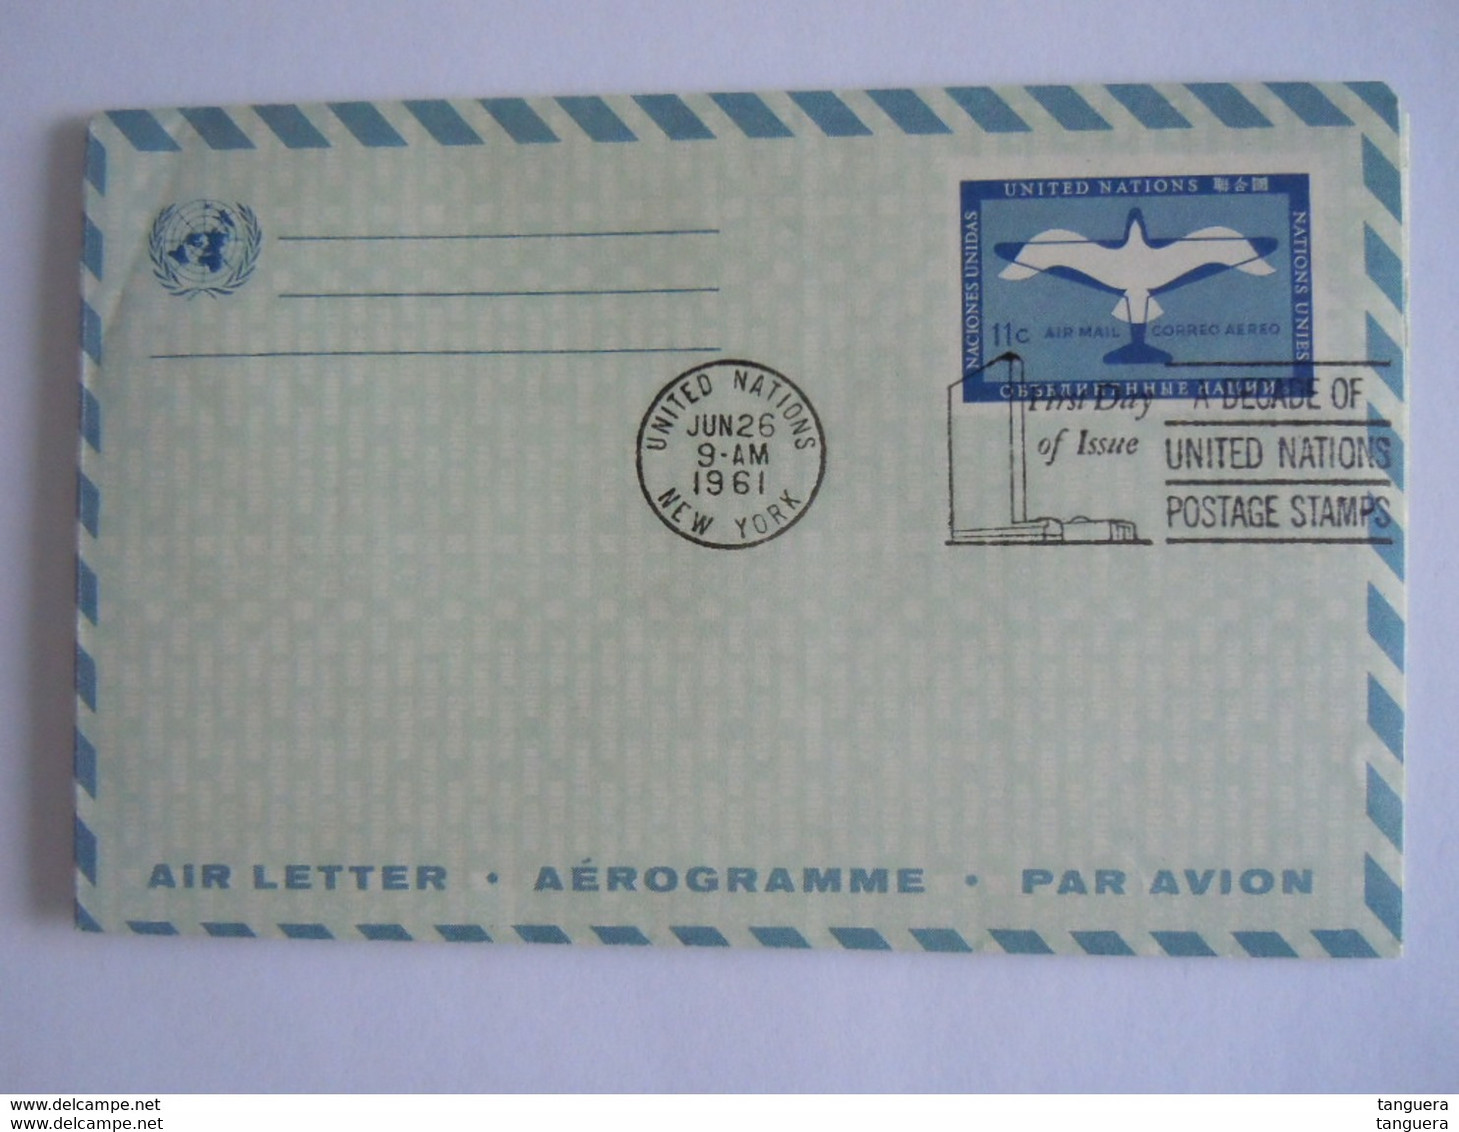 UN UNO United Nations New York Aerogramme Stationery Entier Postal Air Letter 1961 First Day Of Issue - Luchtpost